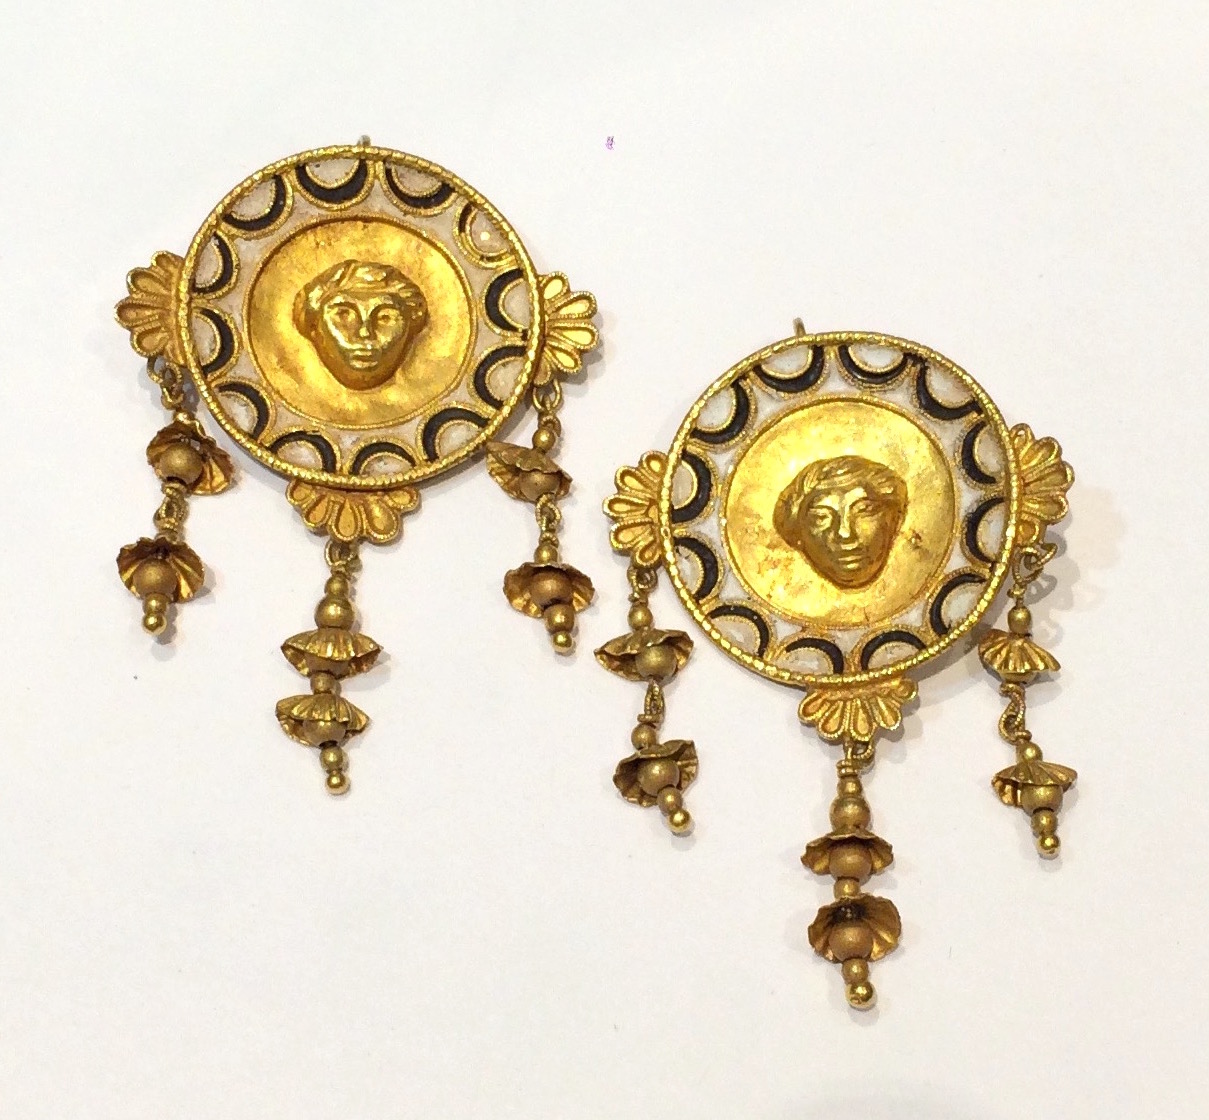 Giacinto Melillo (attr.) Italian Ancient Revival Medallion 18K gold pendant earrings with white and black enamel and central face motifs, hanging floral details, retailed in Paris, marked, c. 1880